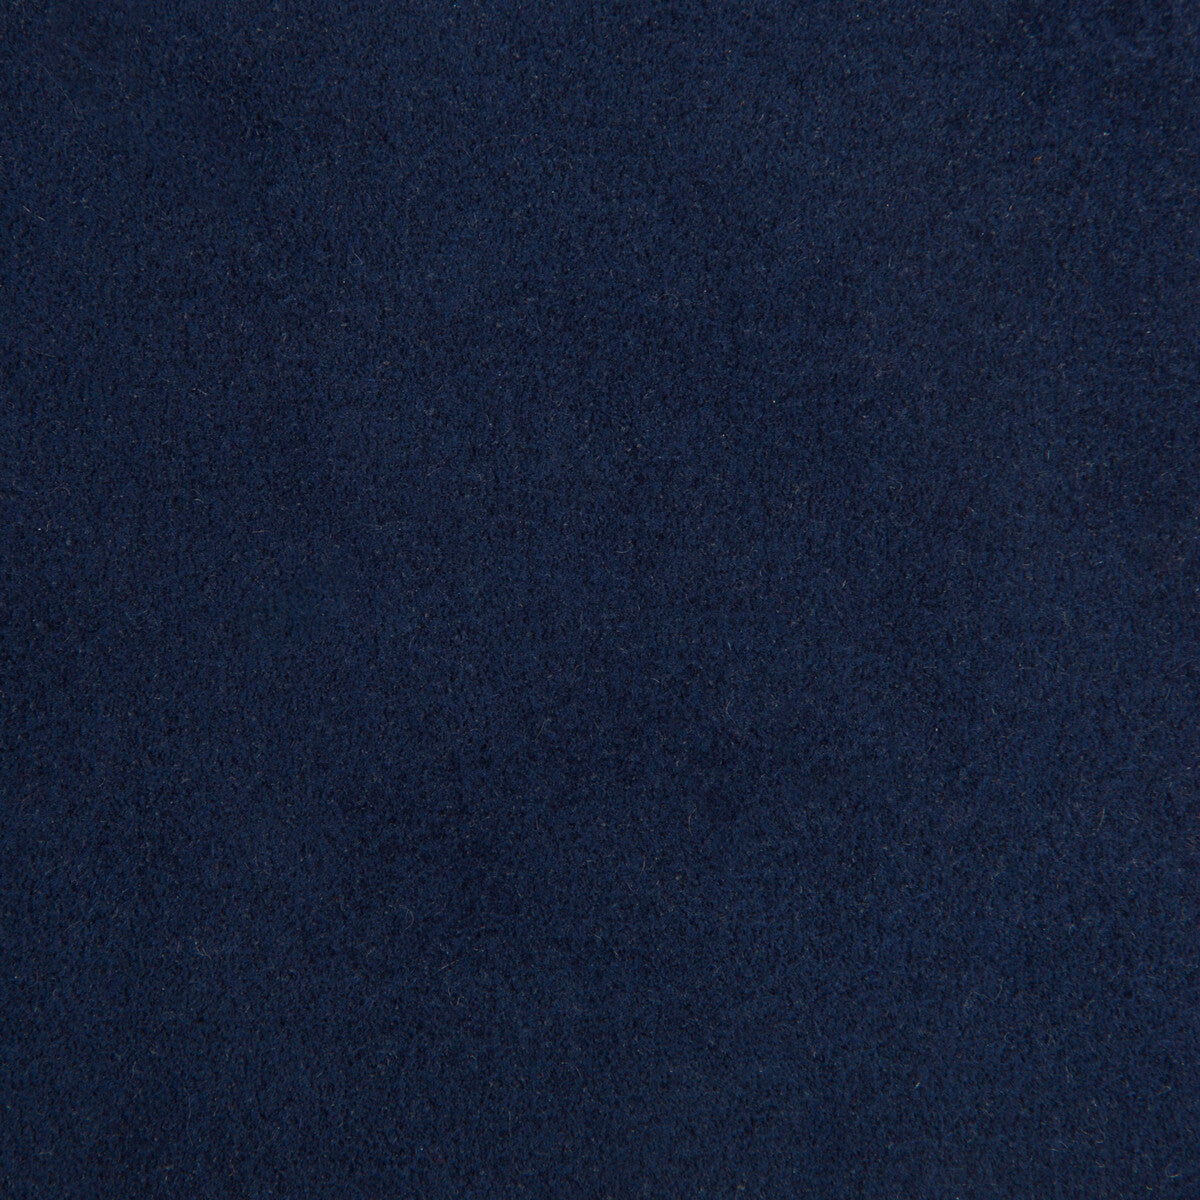 Ultrasuede fabric in nautical color - pattern ULTRASUEDE.85.0 - by Kravet Design in the Ultrasuede collection